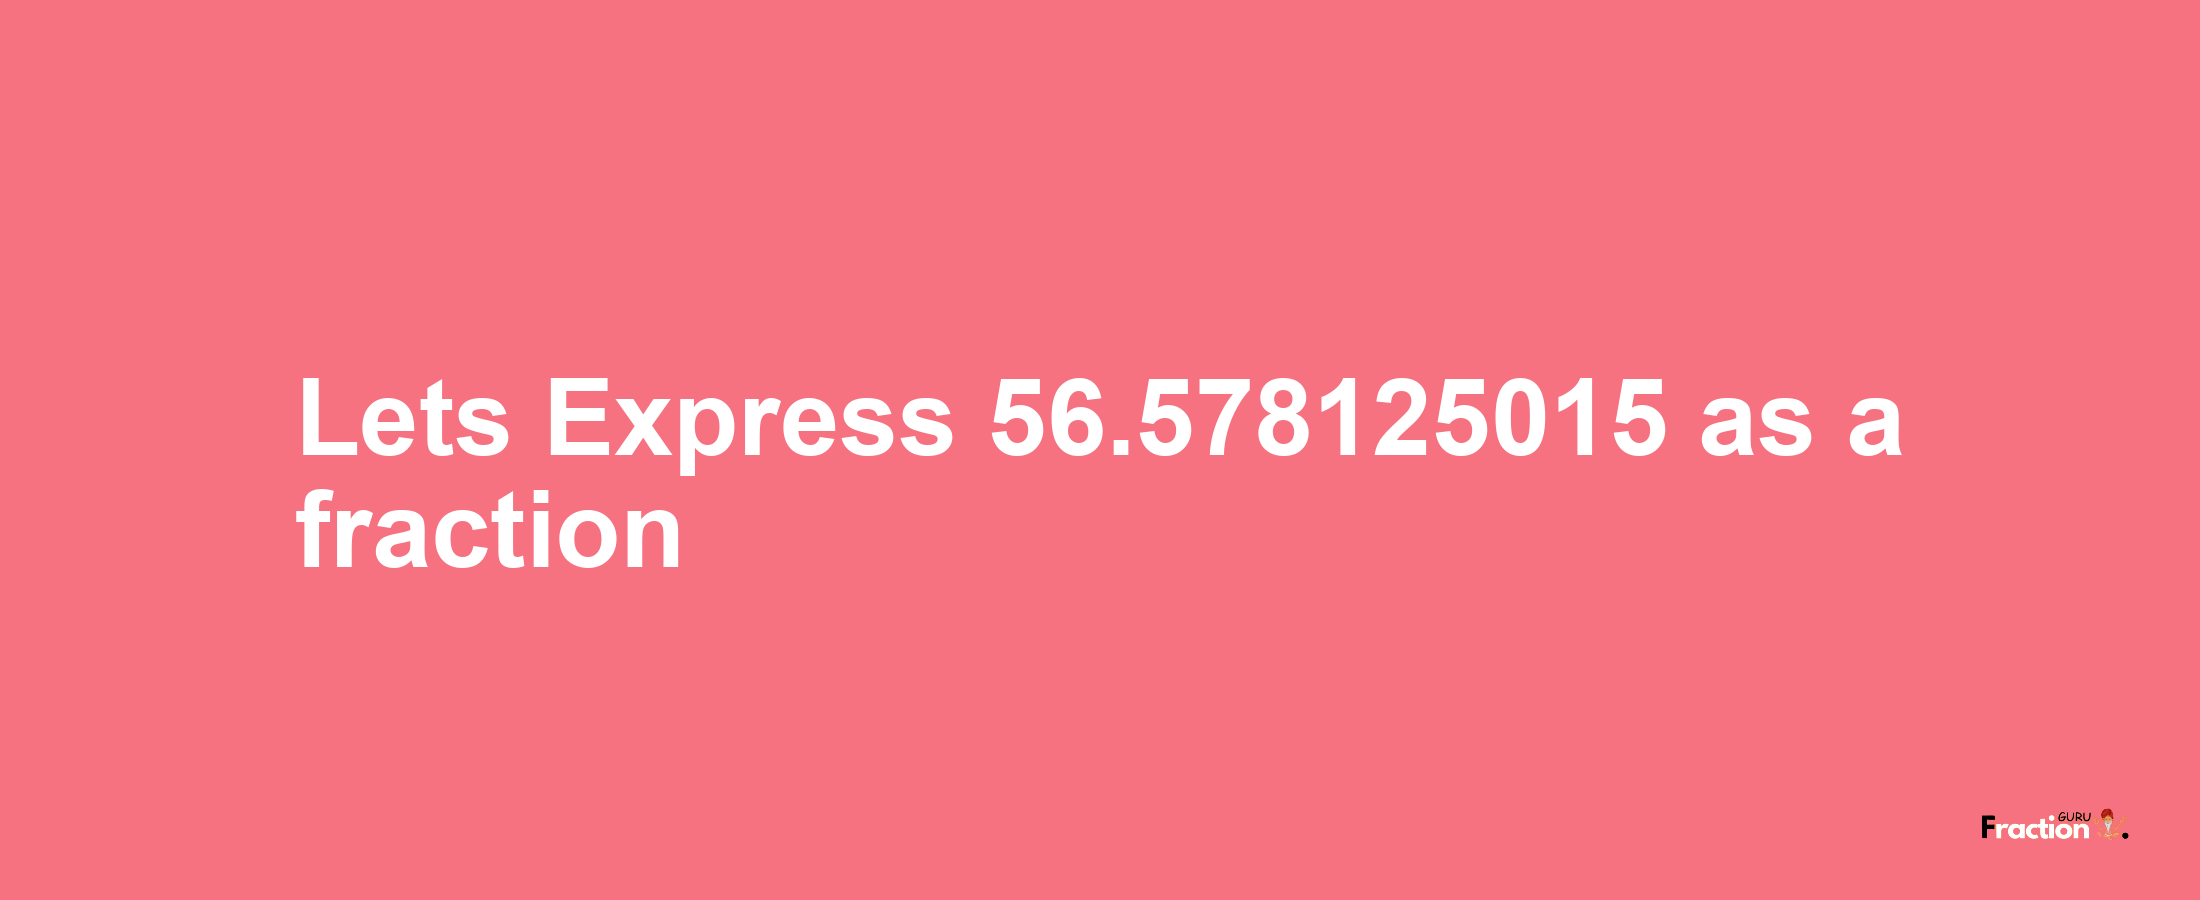 Lets Express 56.578125015 as afraction